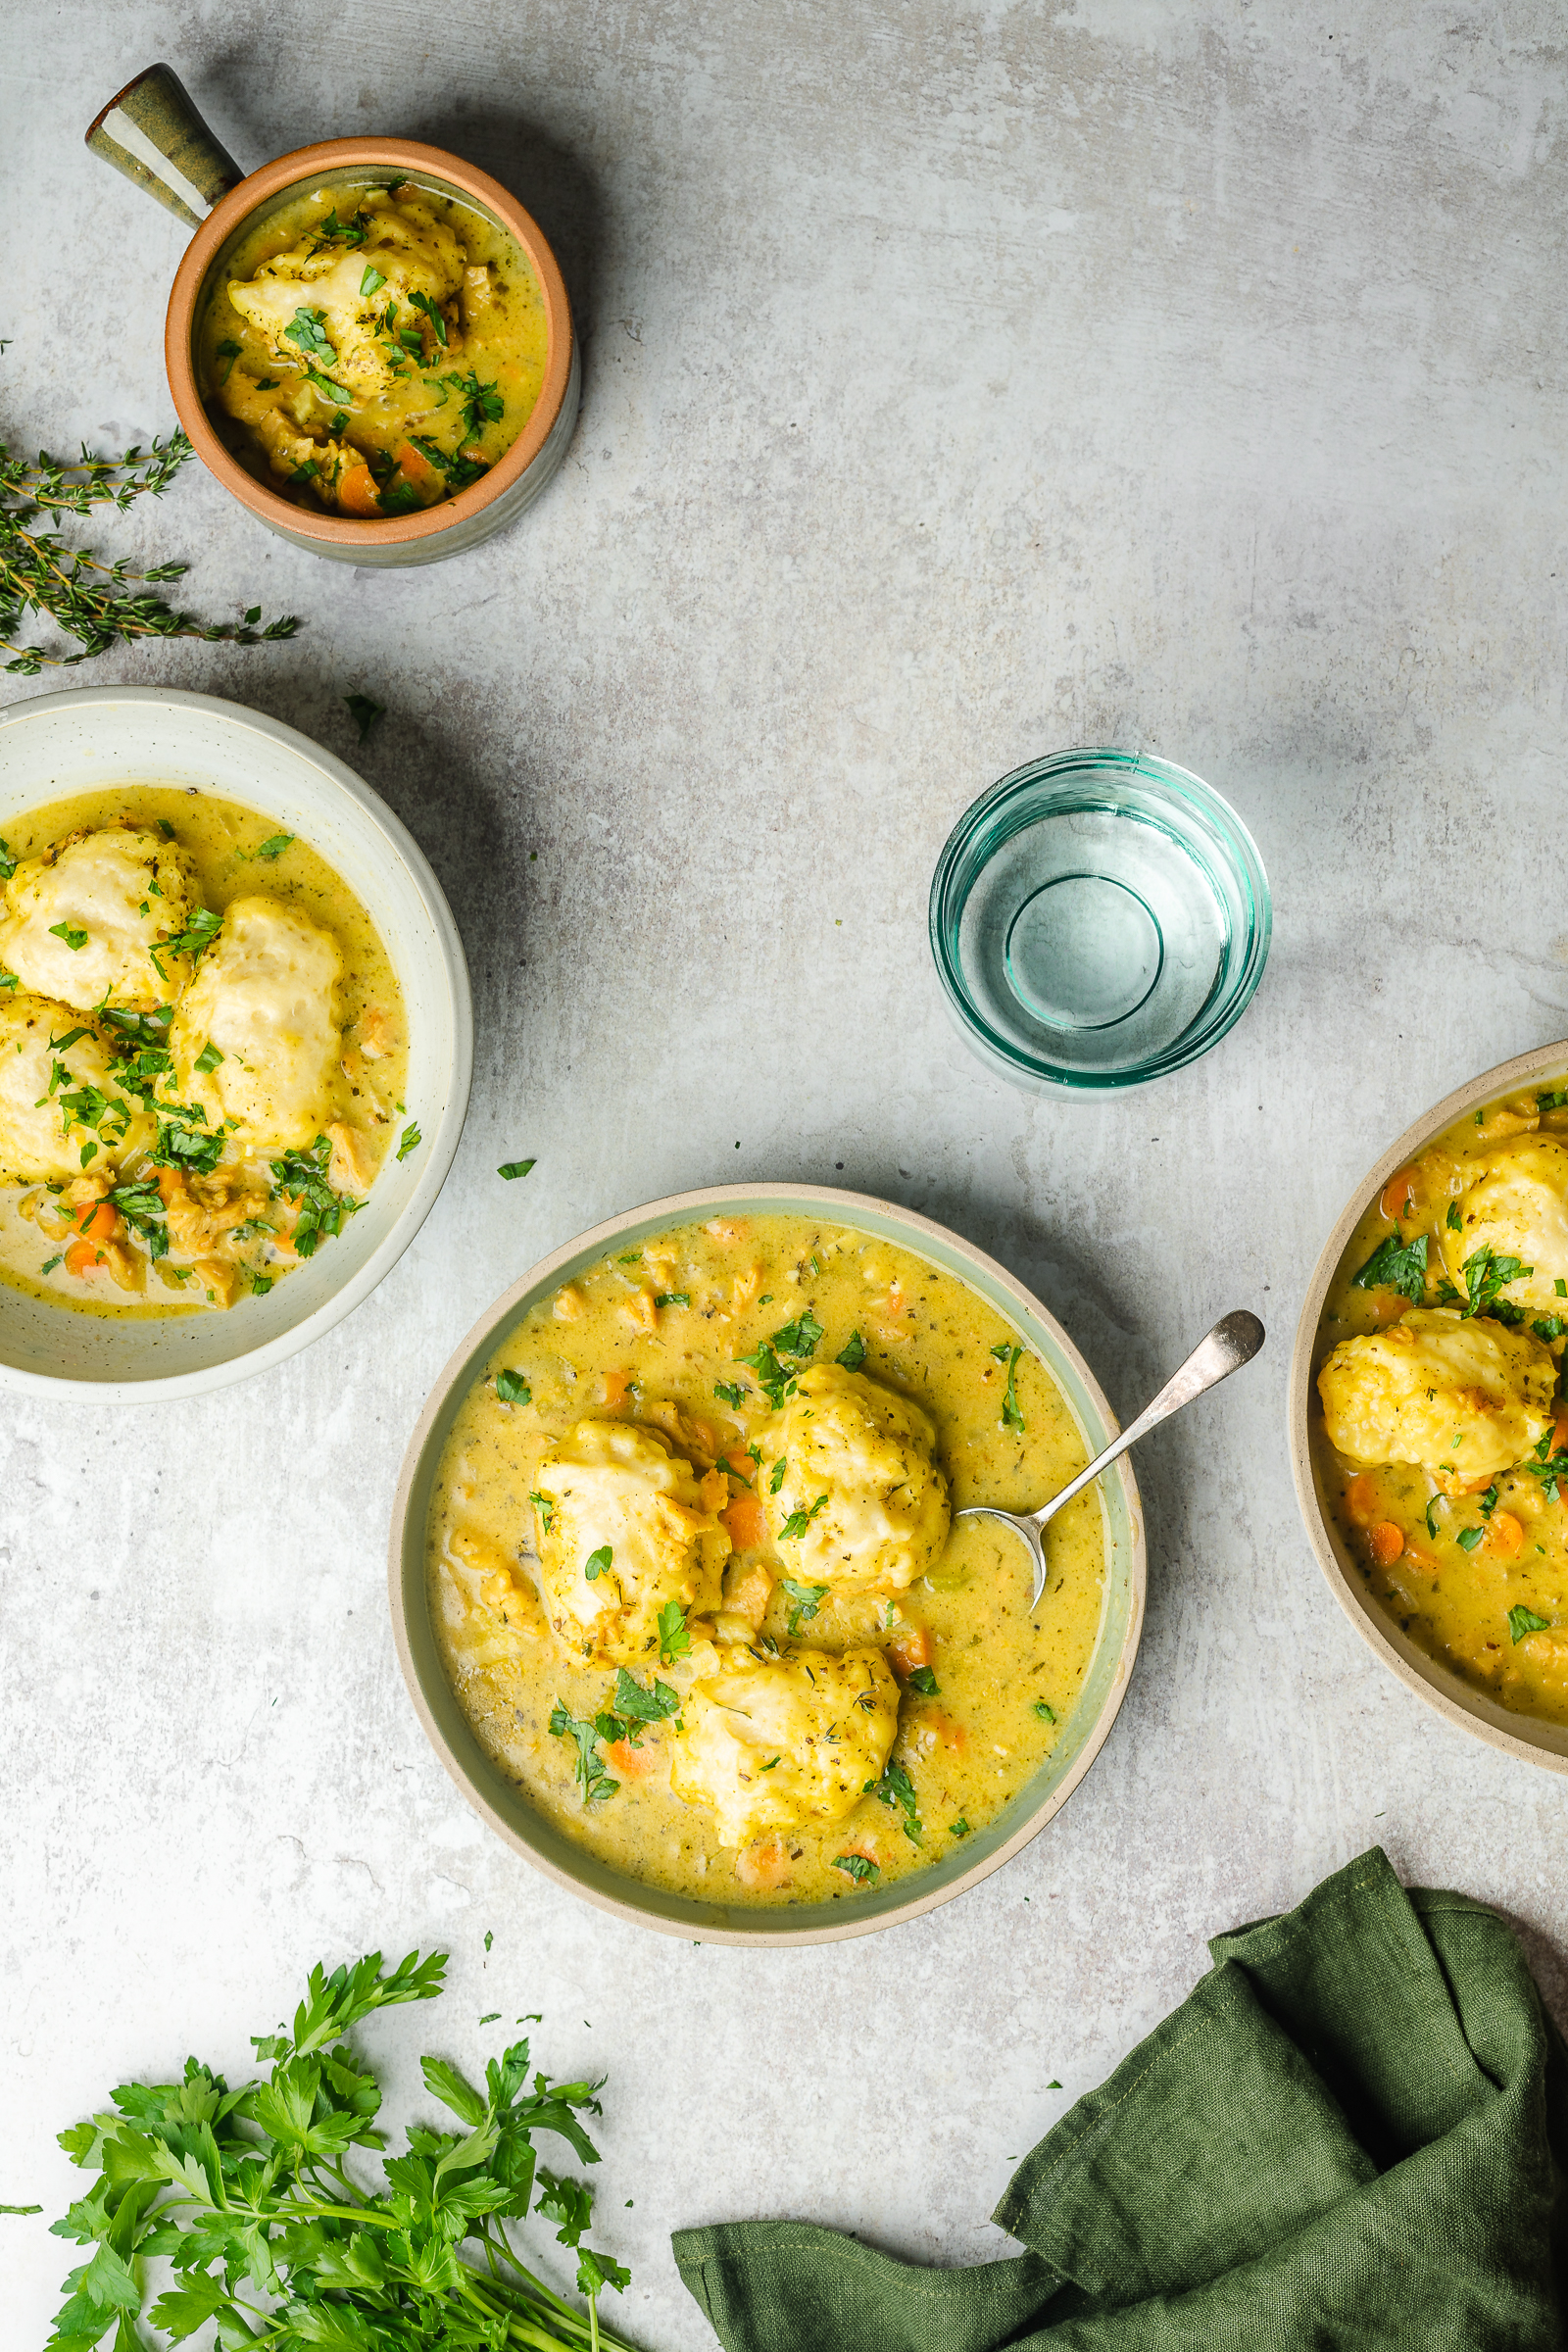 4 bowls of chicken and dumplings in serving dishes garnished with parsley.